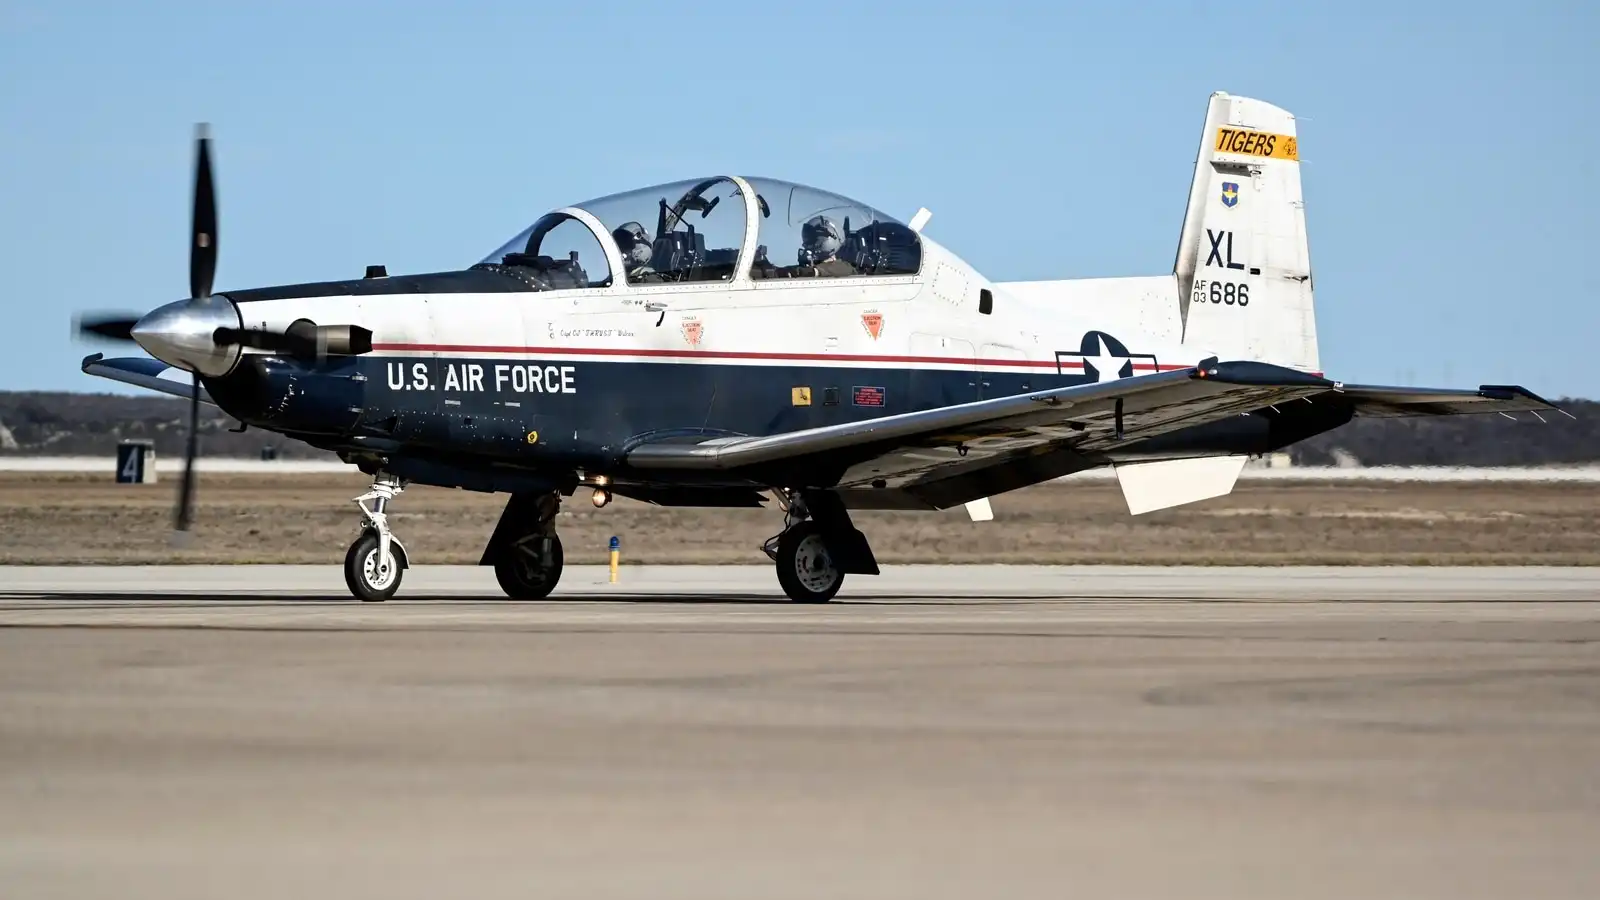 Air Force Instructor Pilot Fatally Injured in Ejection Seat Accident in US